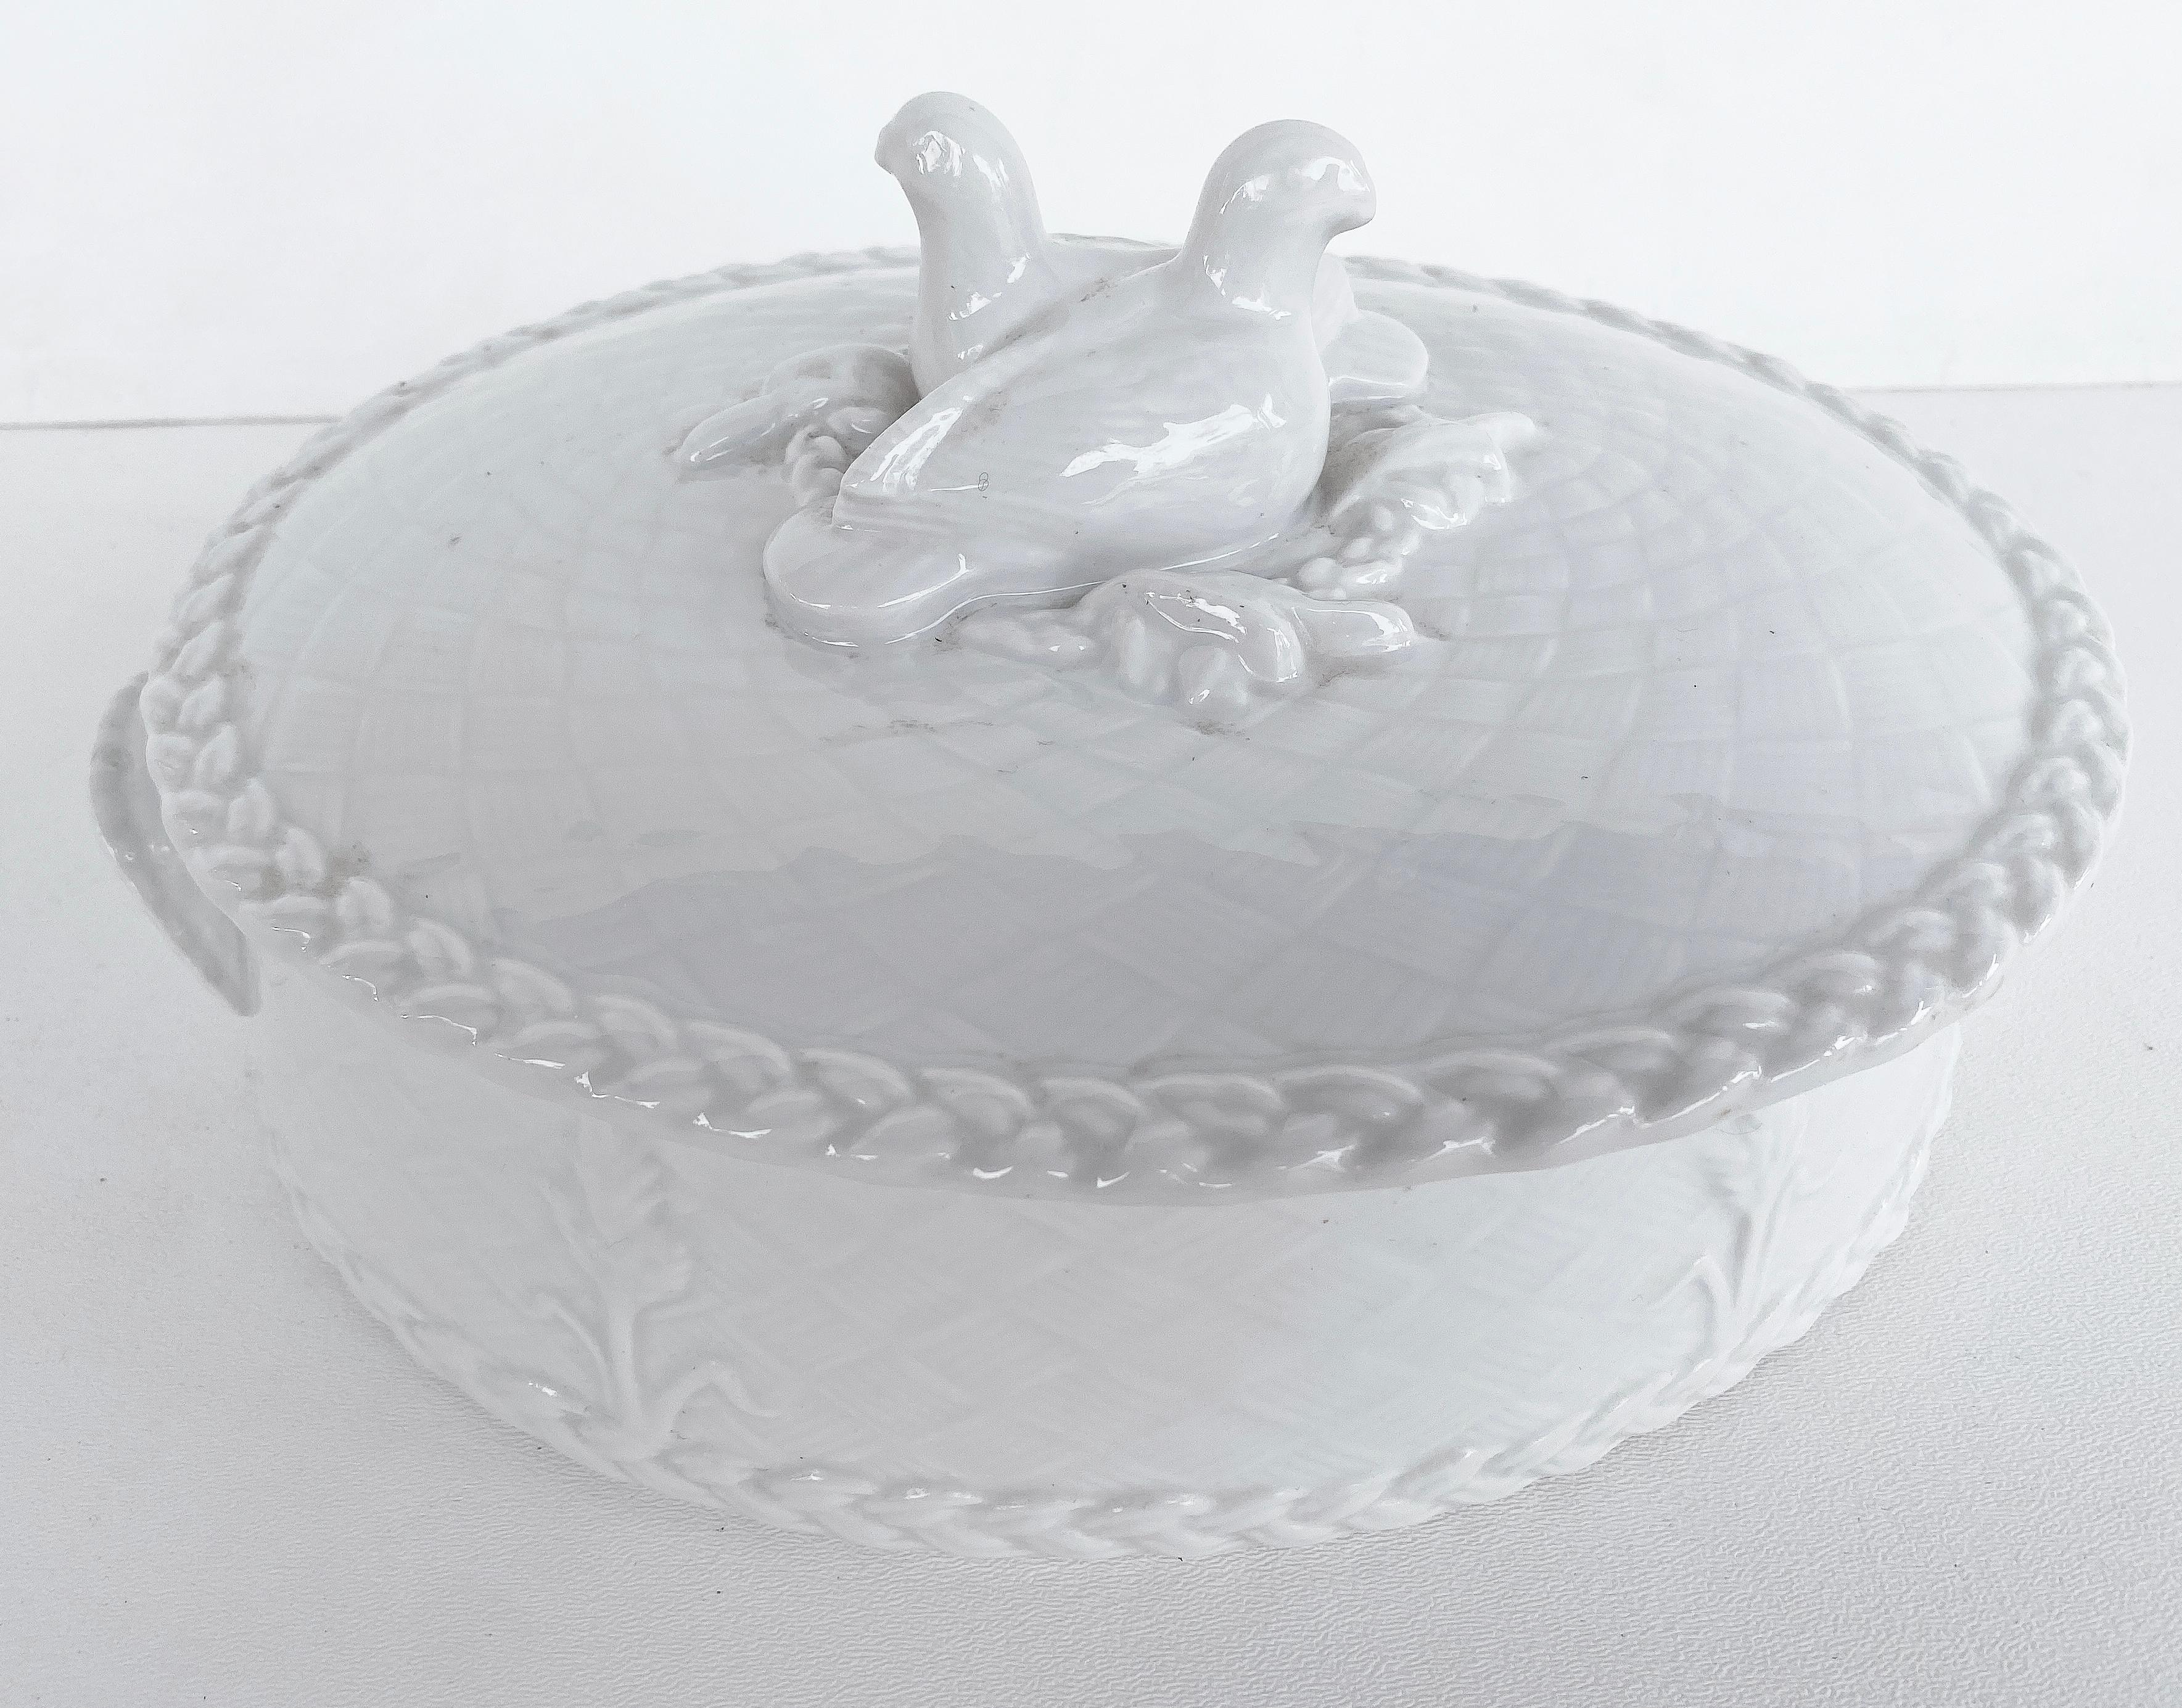 Royal Worcester fine porcelain covered casserole dfish, England

Offered for sale is a bone-white Royal Worcester fine English porcelain-covered casserole dish. The covered casserole has two birds as a handle for the lid and two handles at the